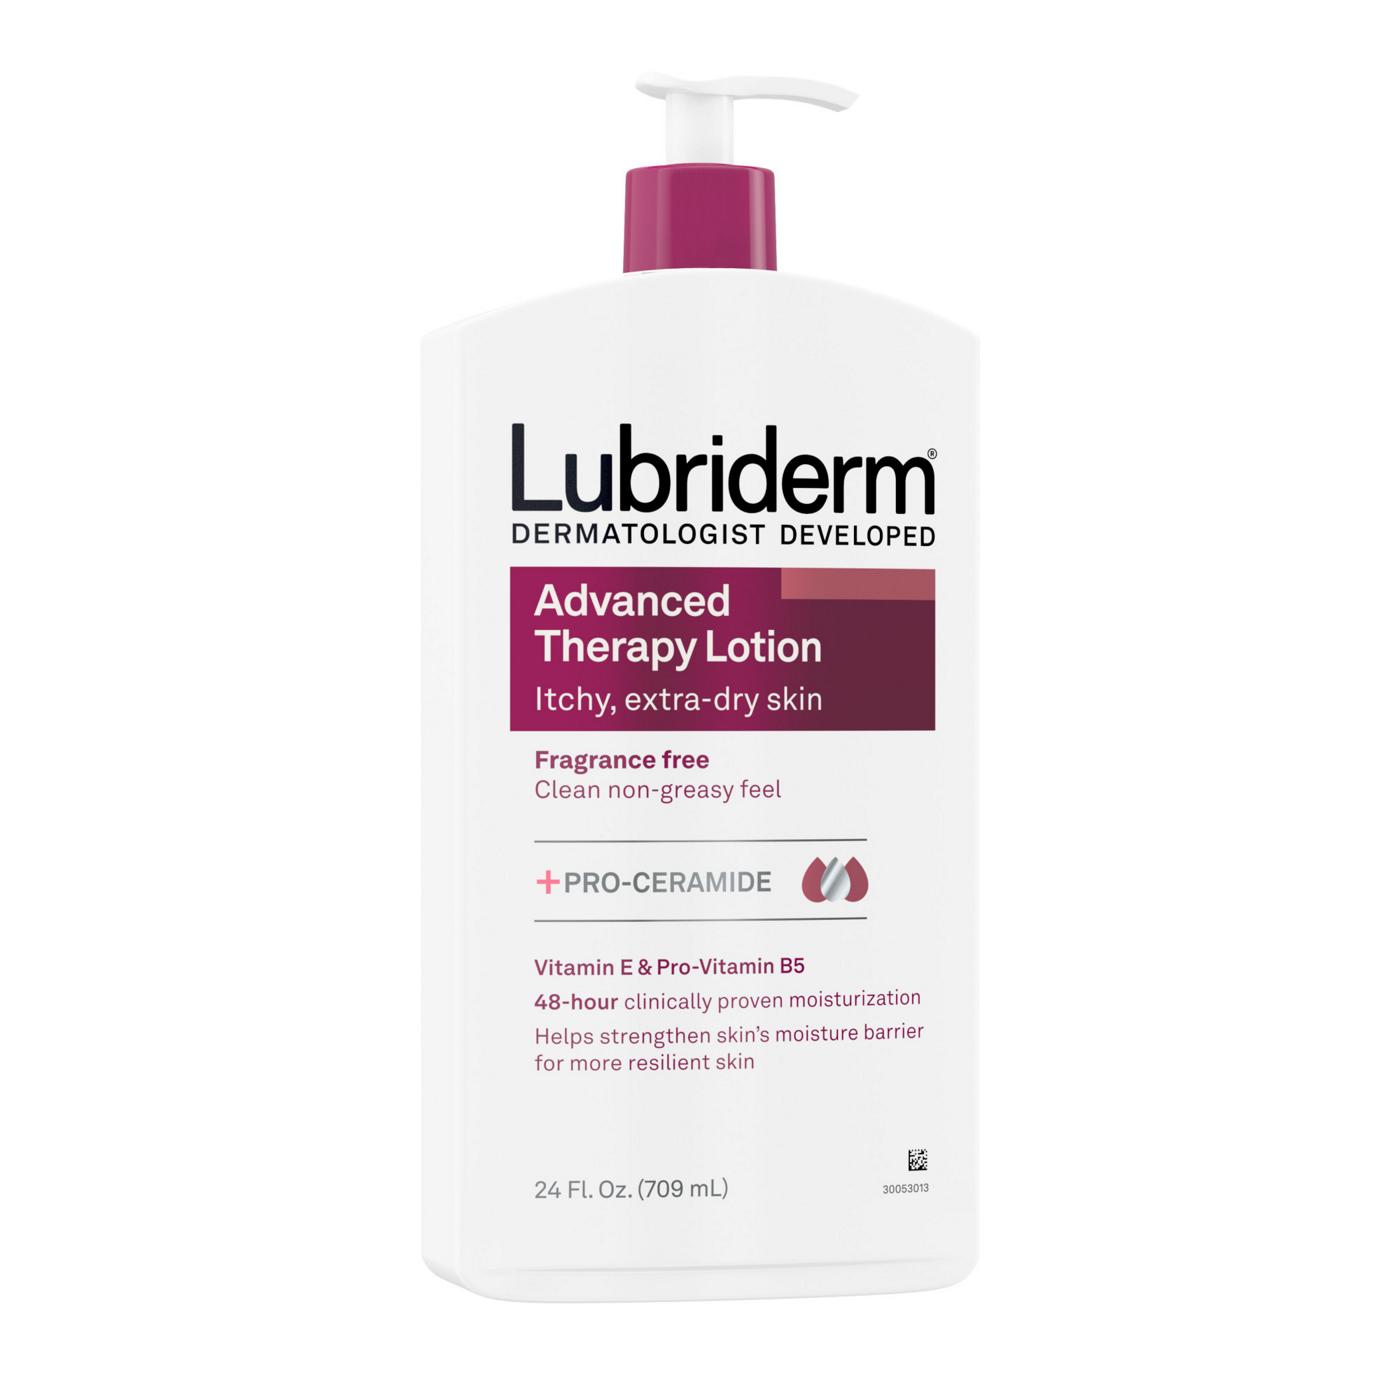 Lubriderm Advanced Therapy Lotion; image 8 of 9